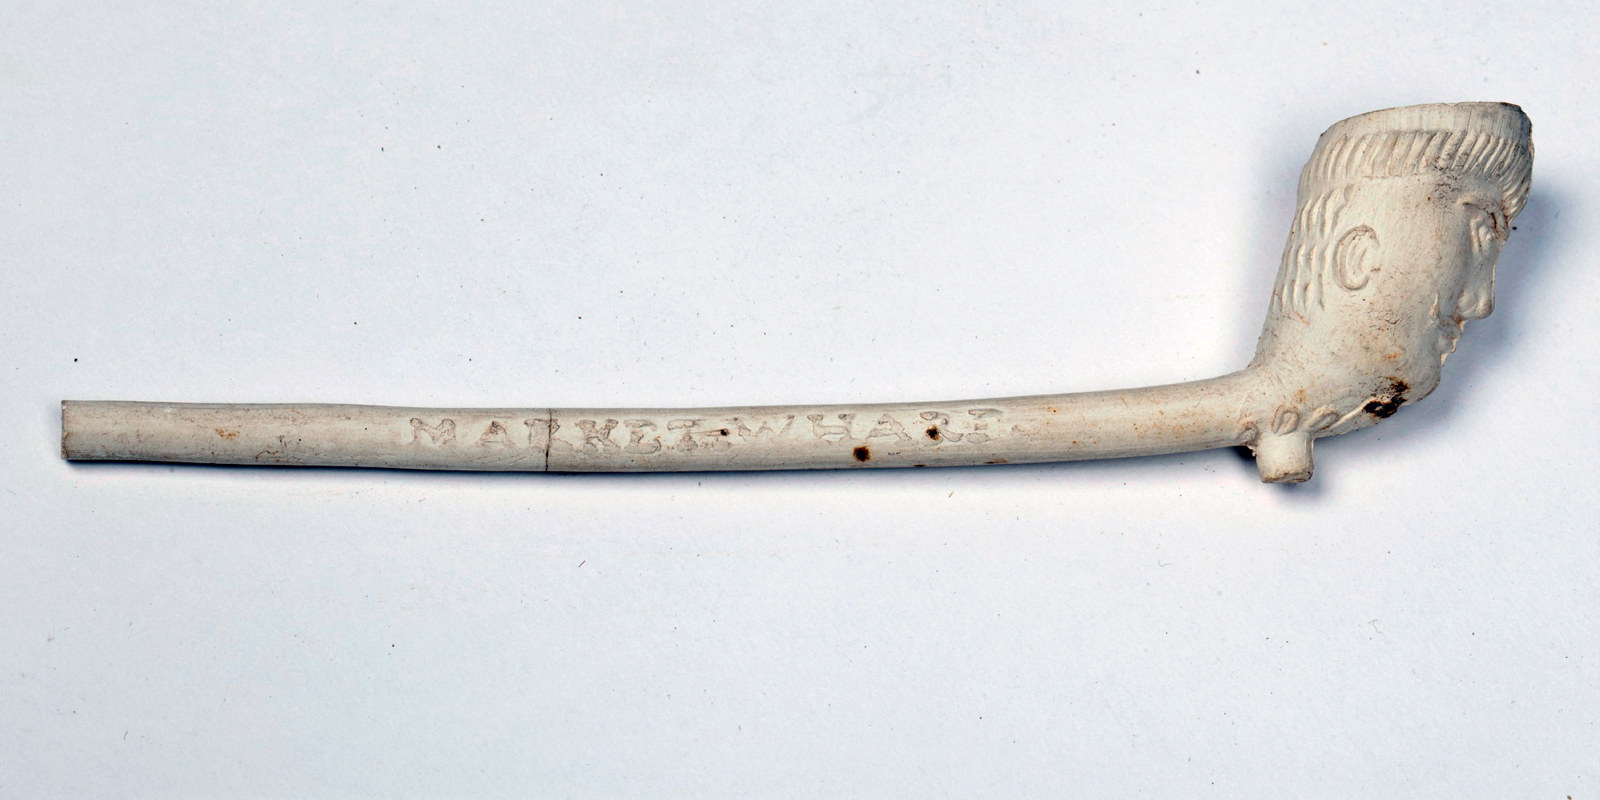 Slender-stemmed white clay pipe with carved bowl and lettering on stem.